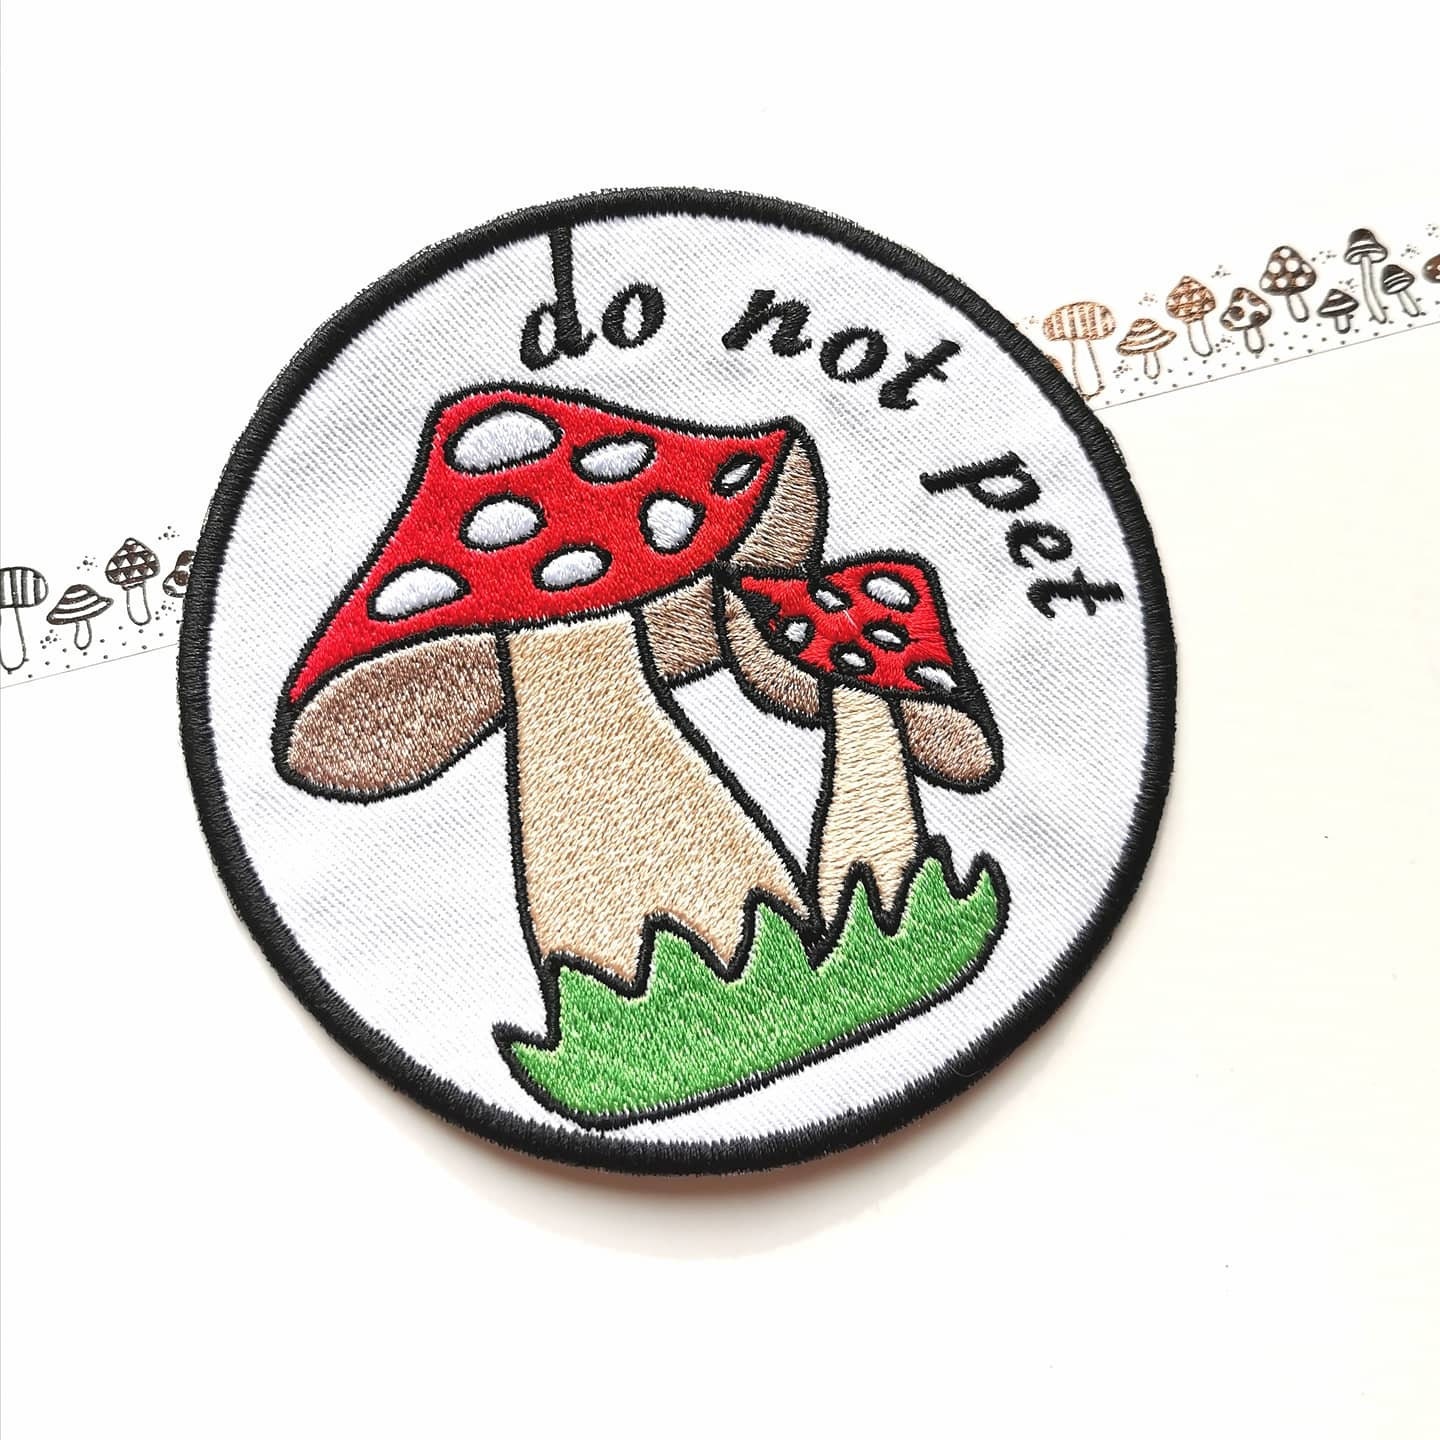 Emotional Support HUMAN Do Not Pet Morale Patch